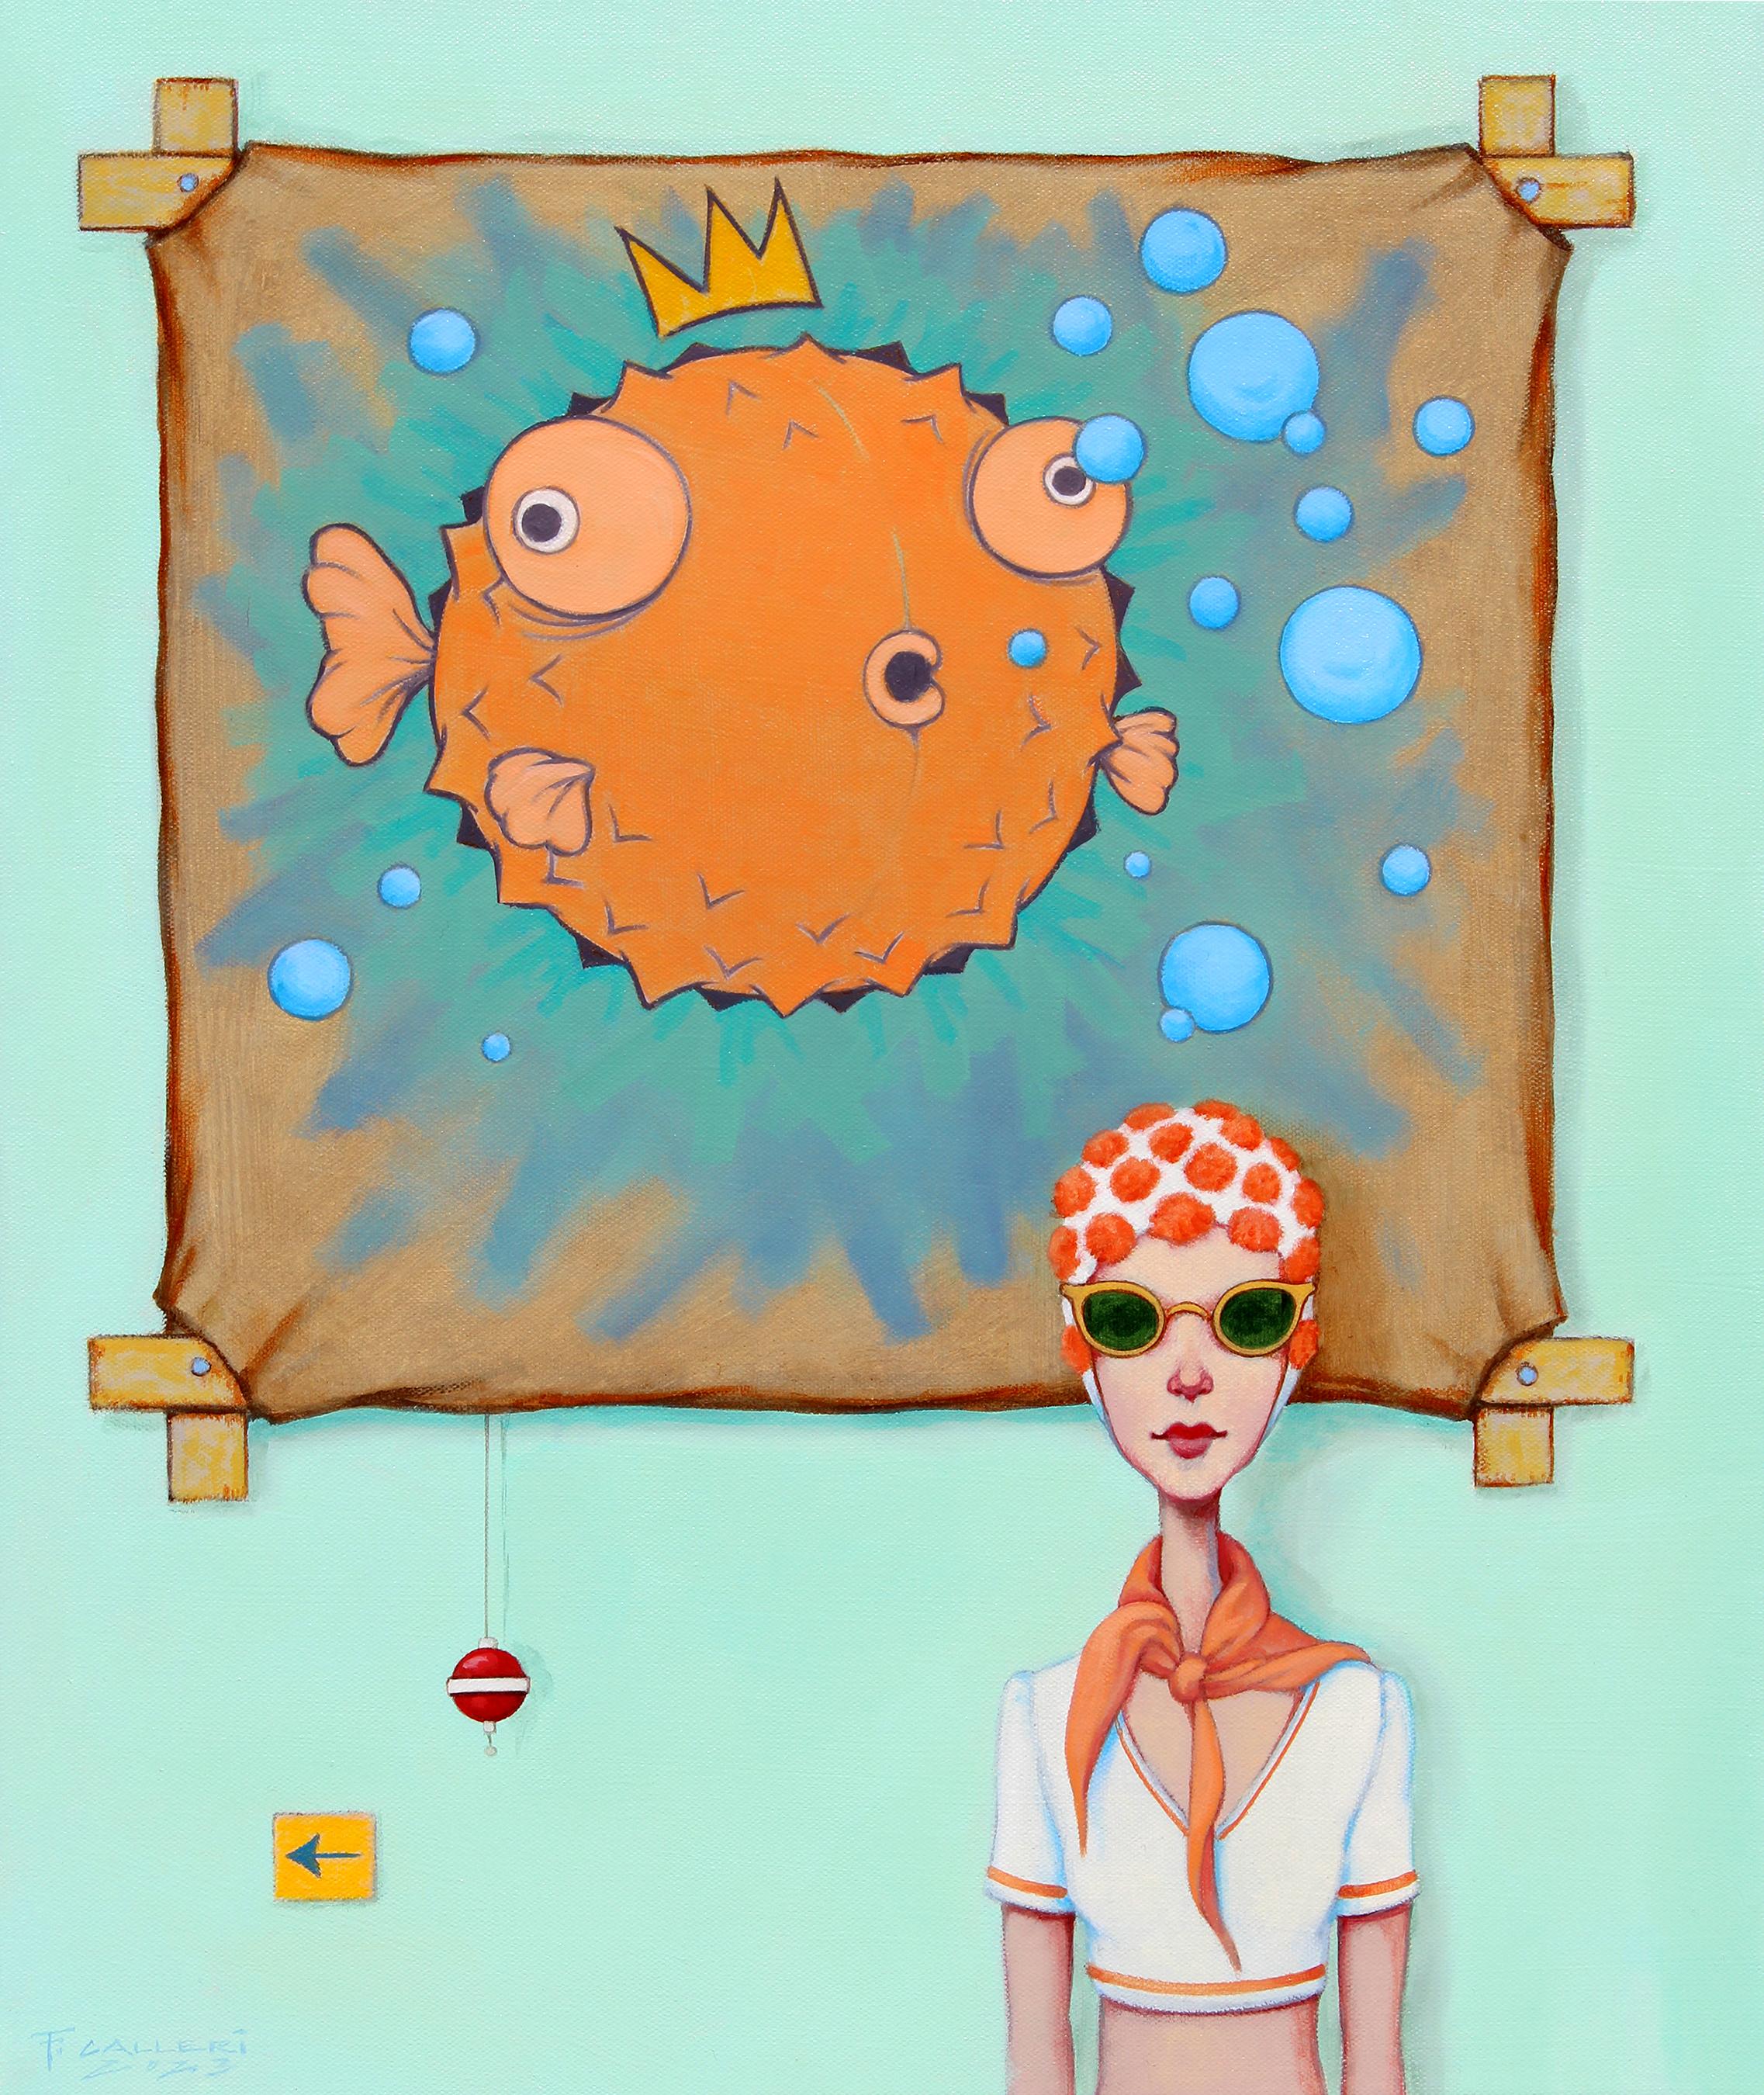 Fred Calleri Figurative Painting - "Puff and Stuff" oil painting of a woman in front of orange fish painting